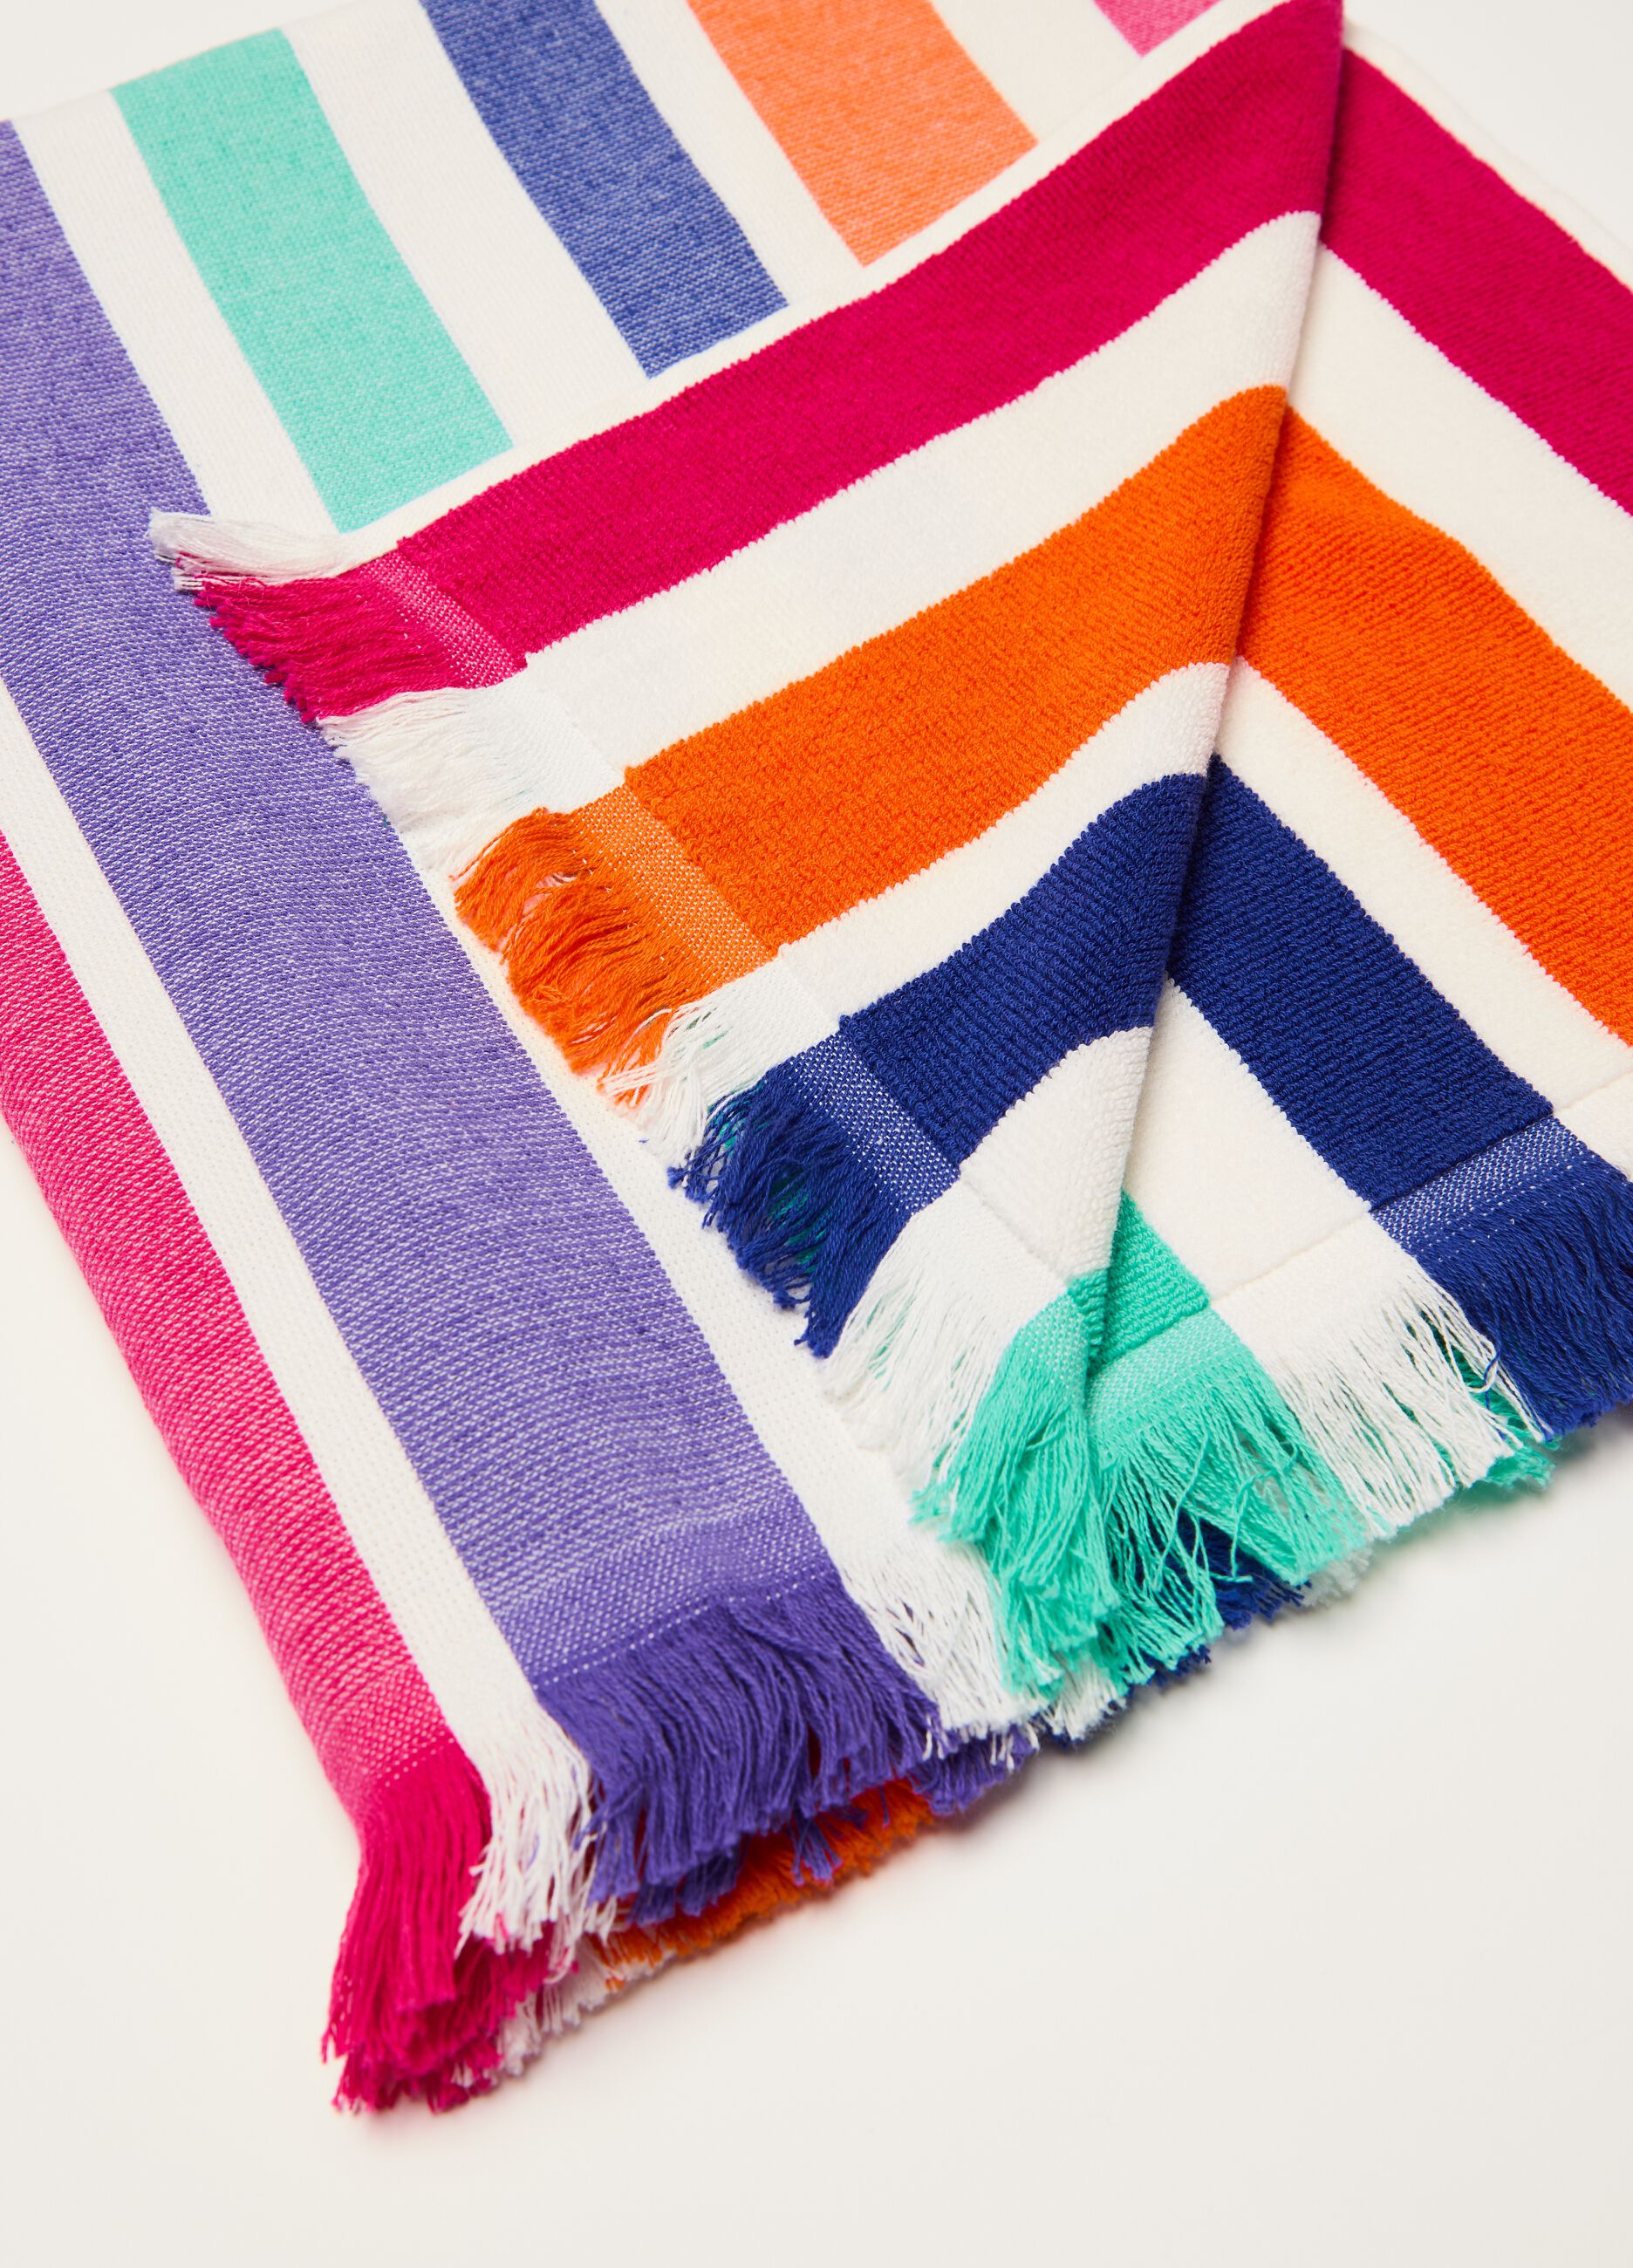 Beach towel with vertical stripes